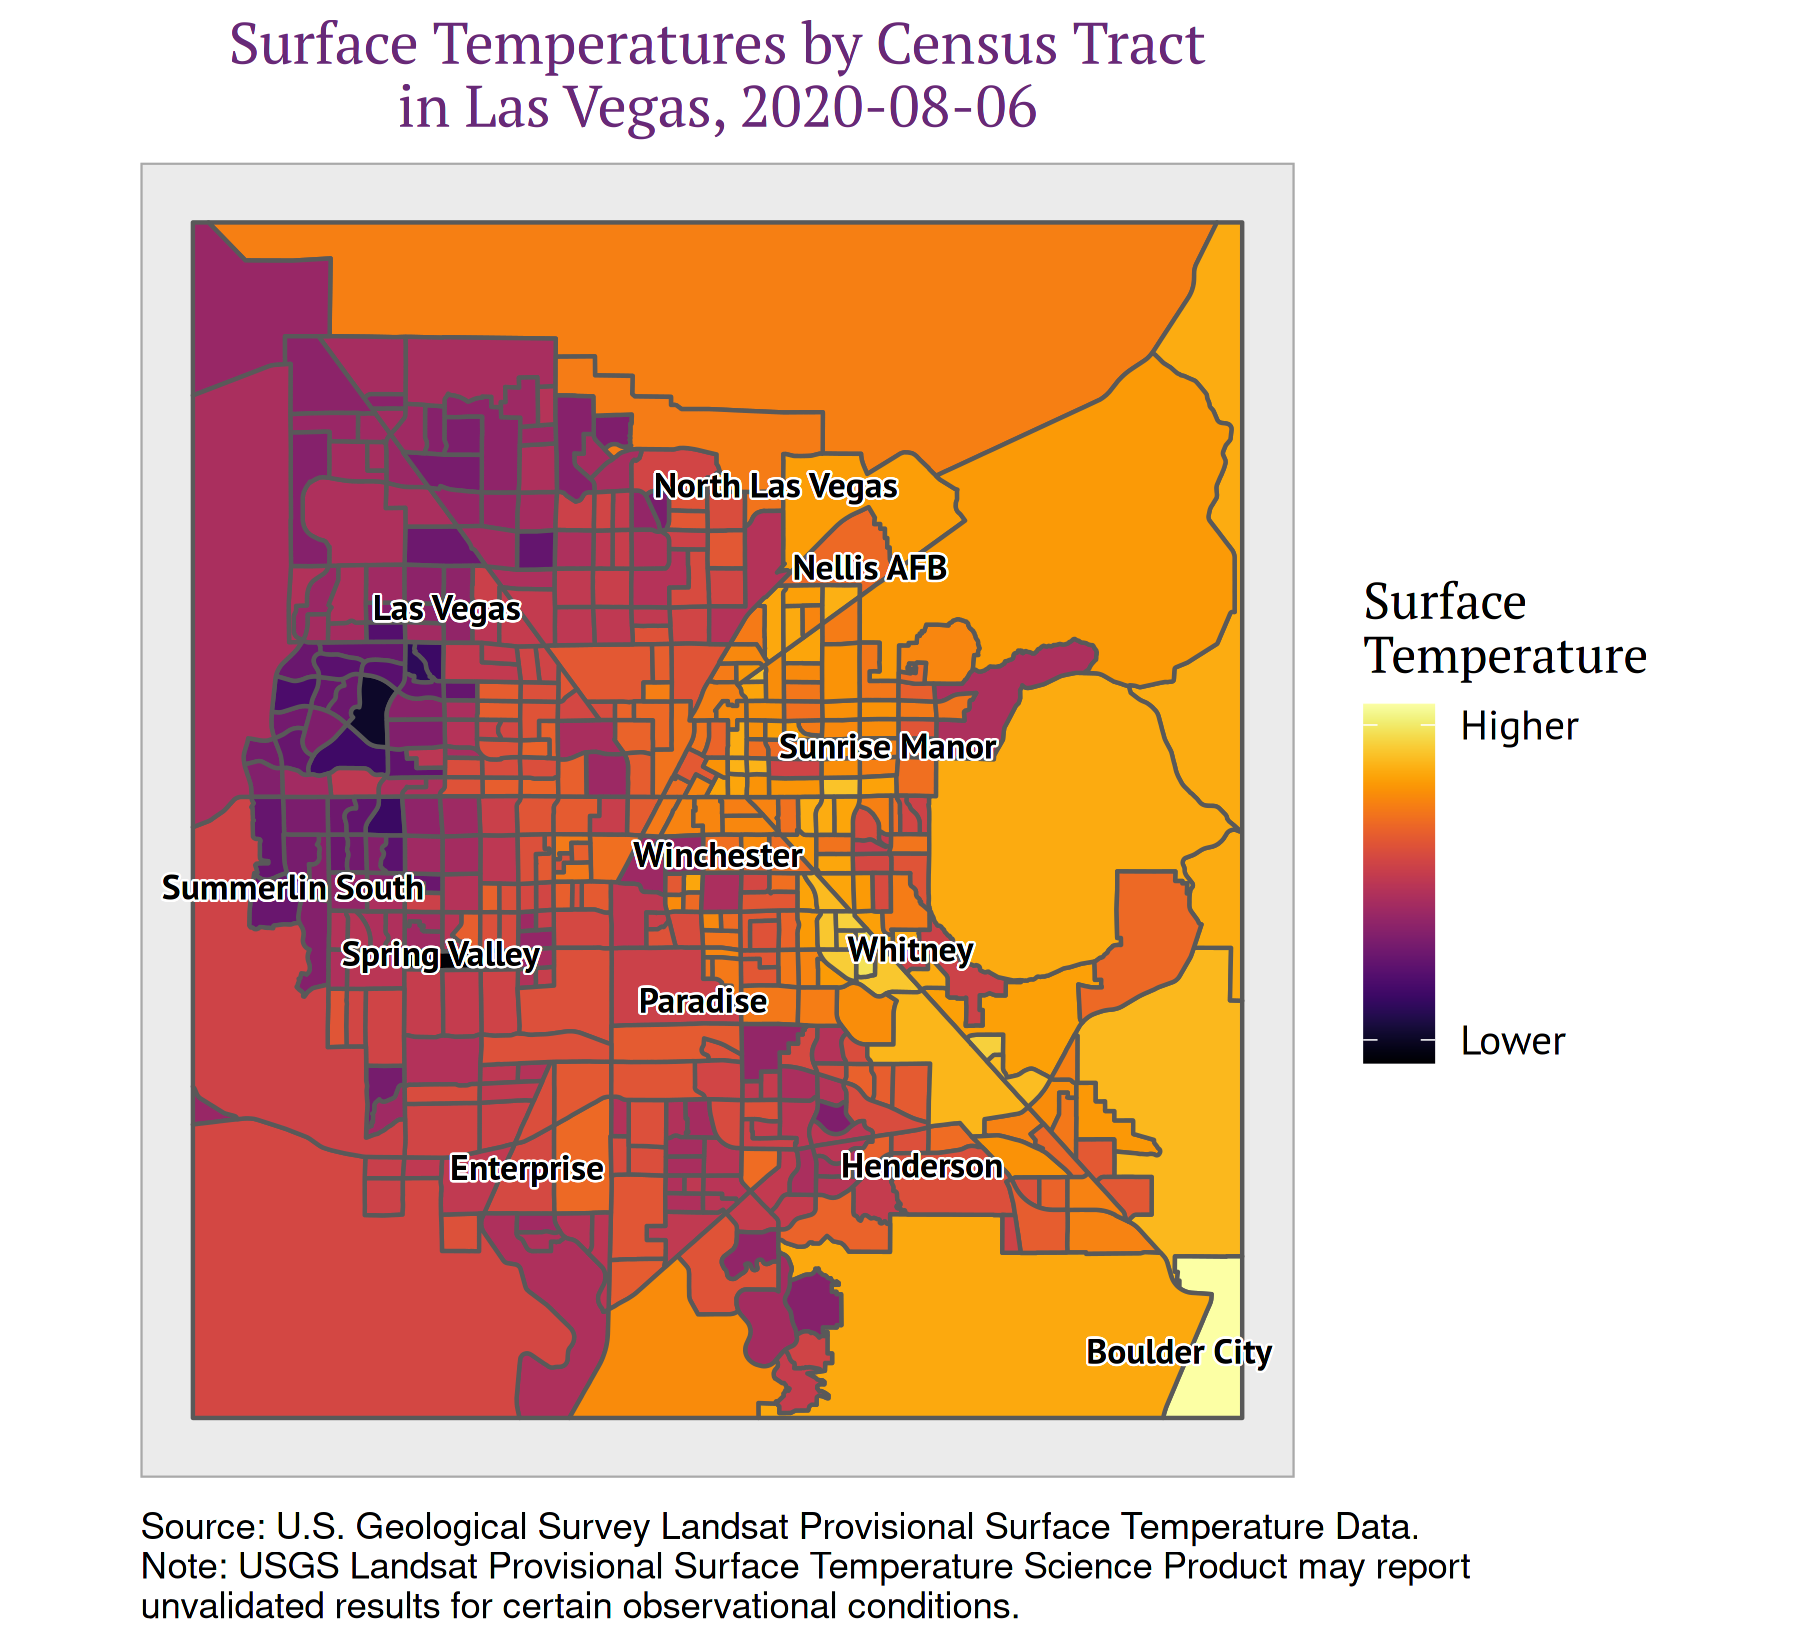 Figure 4: Visualizing Urban Heat by Census Tract in Las Vegas, Nevada